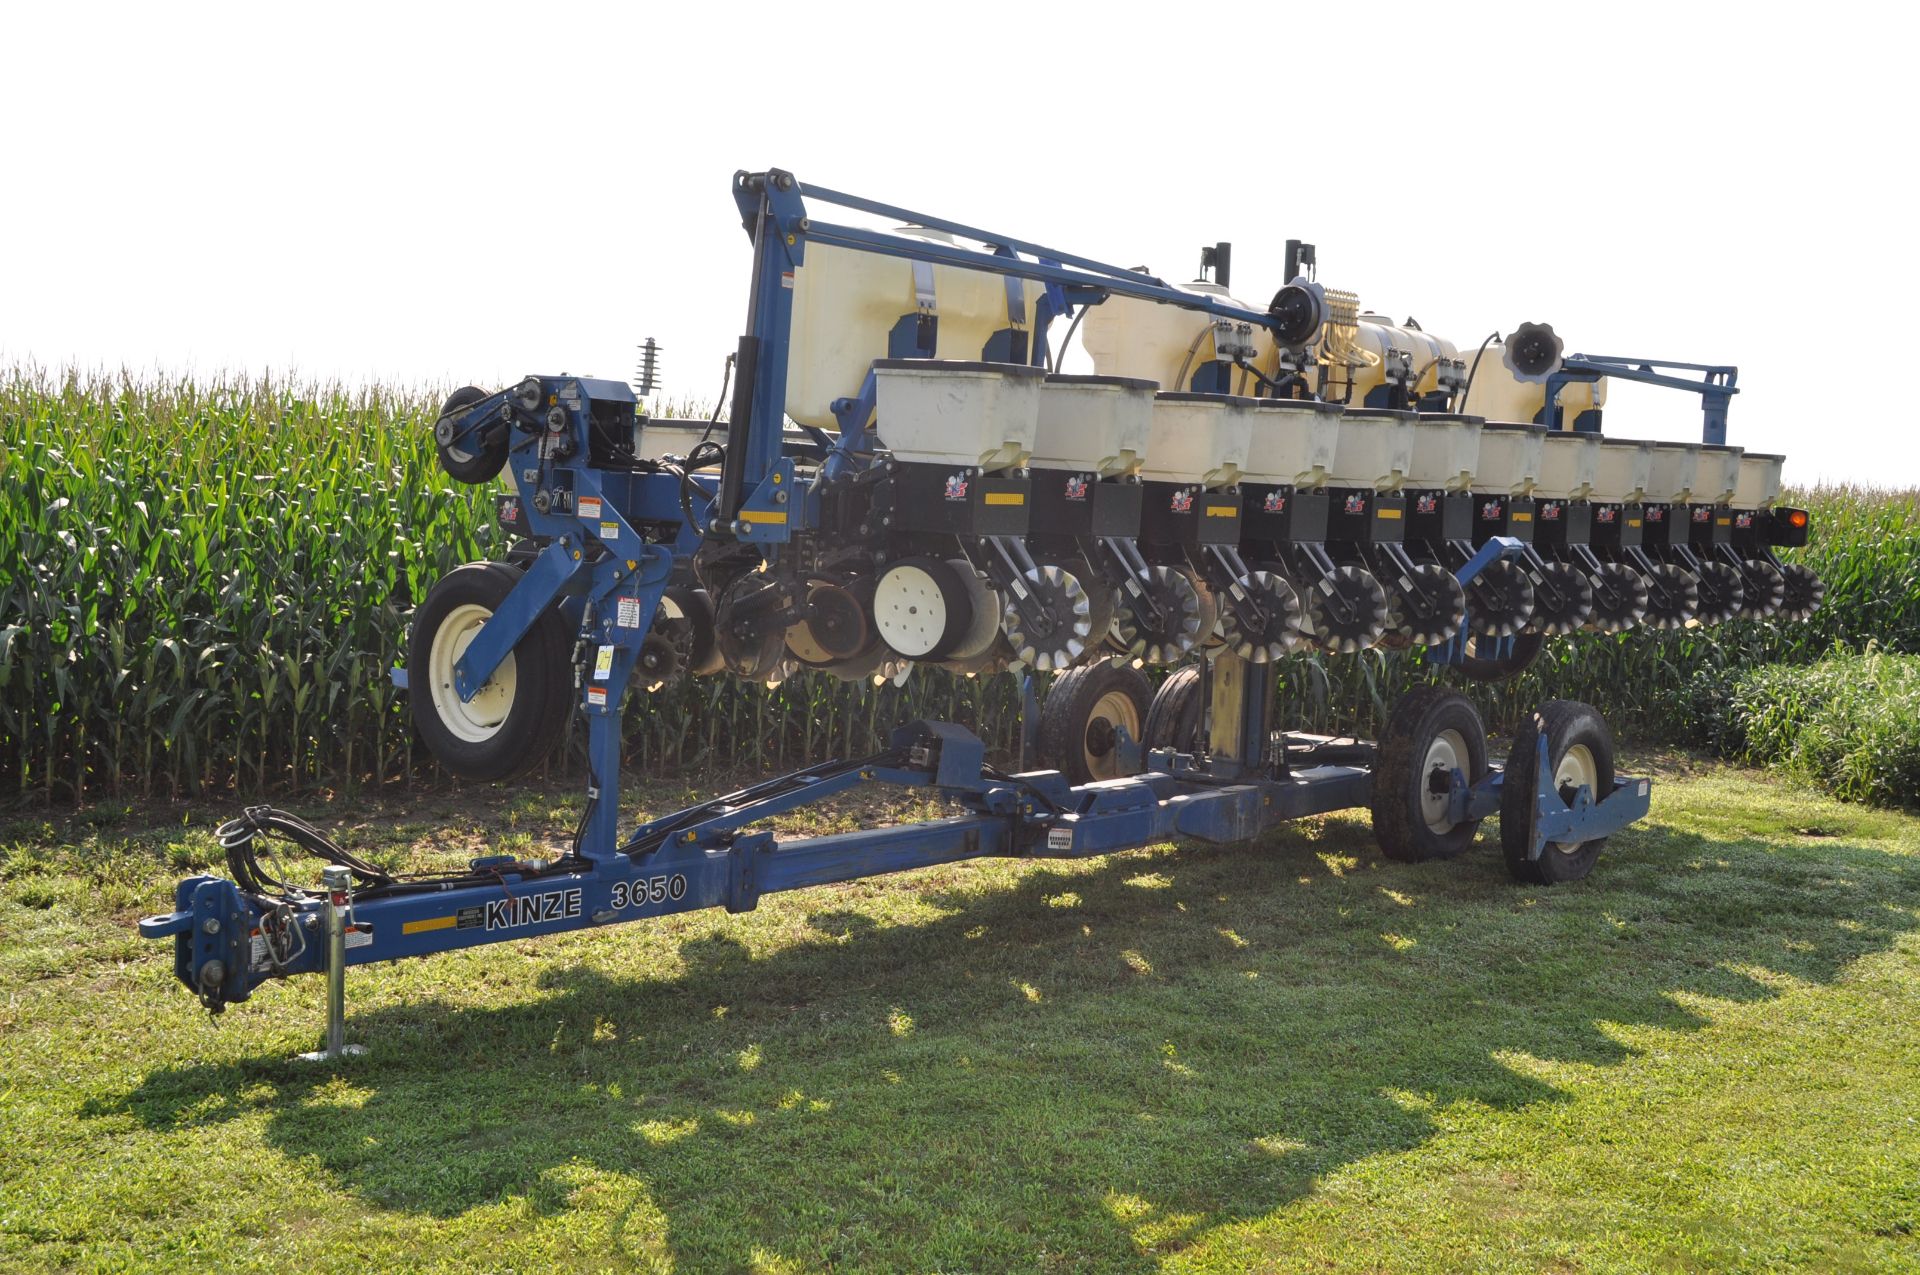 Kinze 3650 12/24 splitter planter, floating row cleaners on corn rows, no till coulters, box units - Image 2 of 20